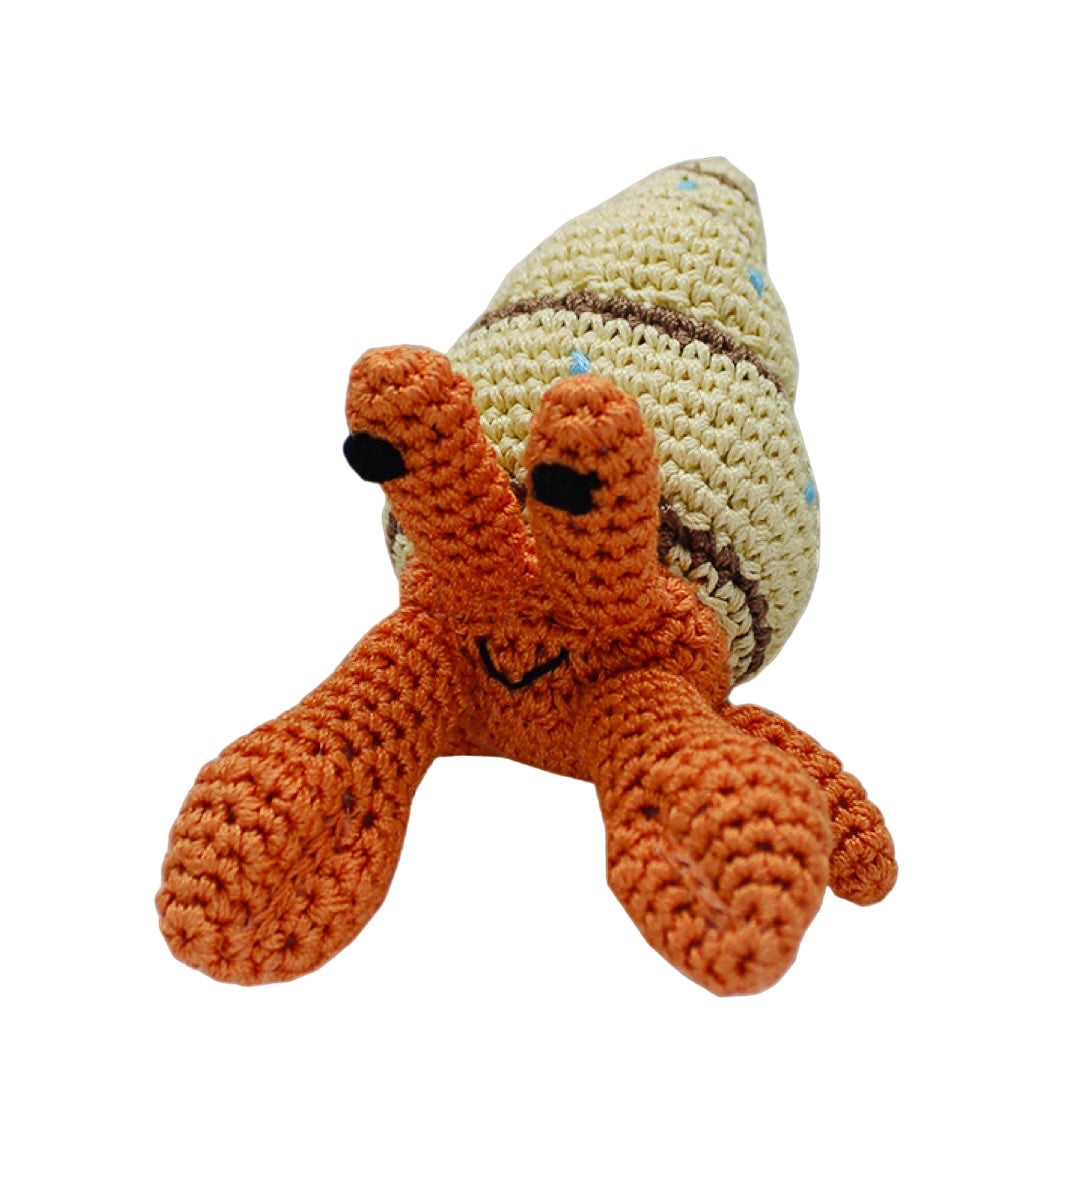 Knit Knacks "Shelly the Hermit Crab" handmade organic cotton dog toy. Smiling orange crab with pinchers in a tan shell.